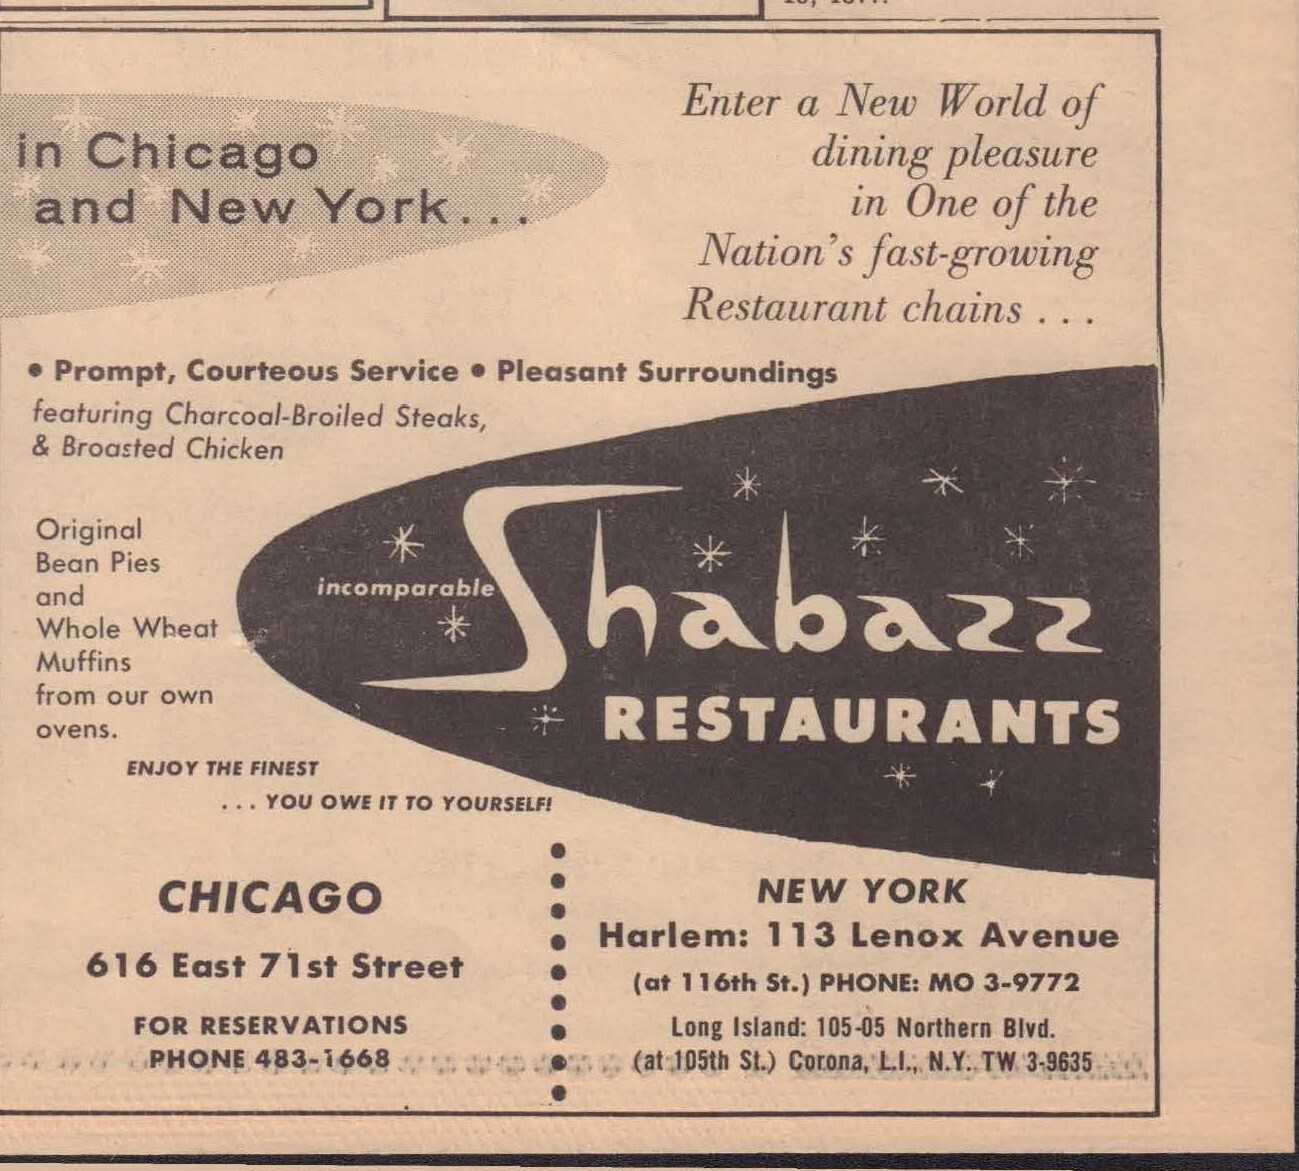 Ad for Shabazz Restaurant in Chicago and New York